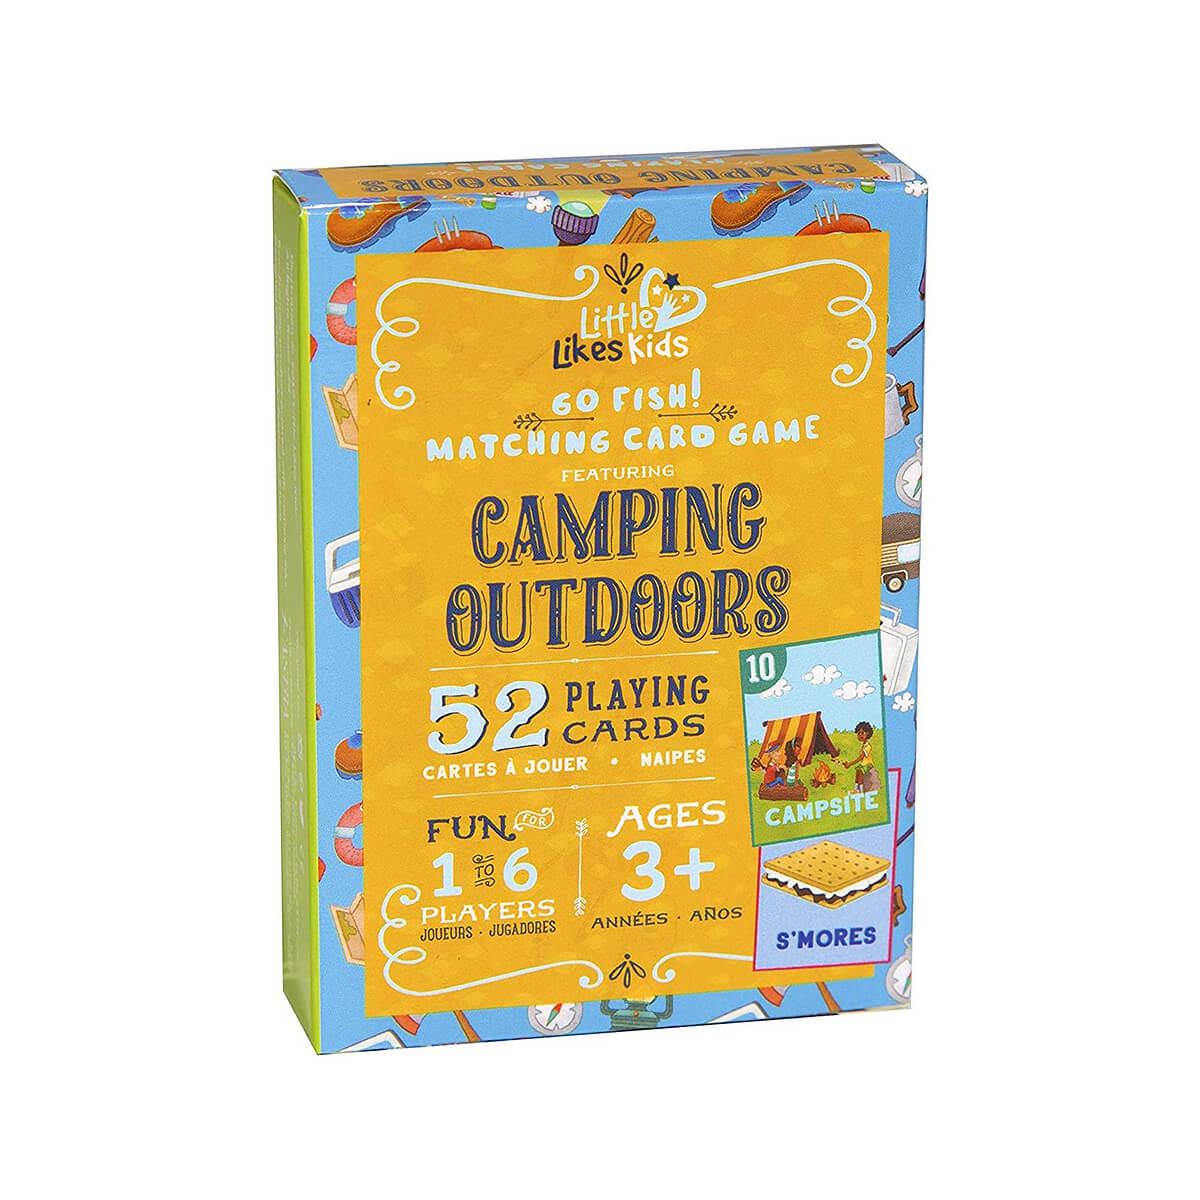  Camping Outdoors Go Fish Cards Game